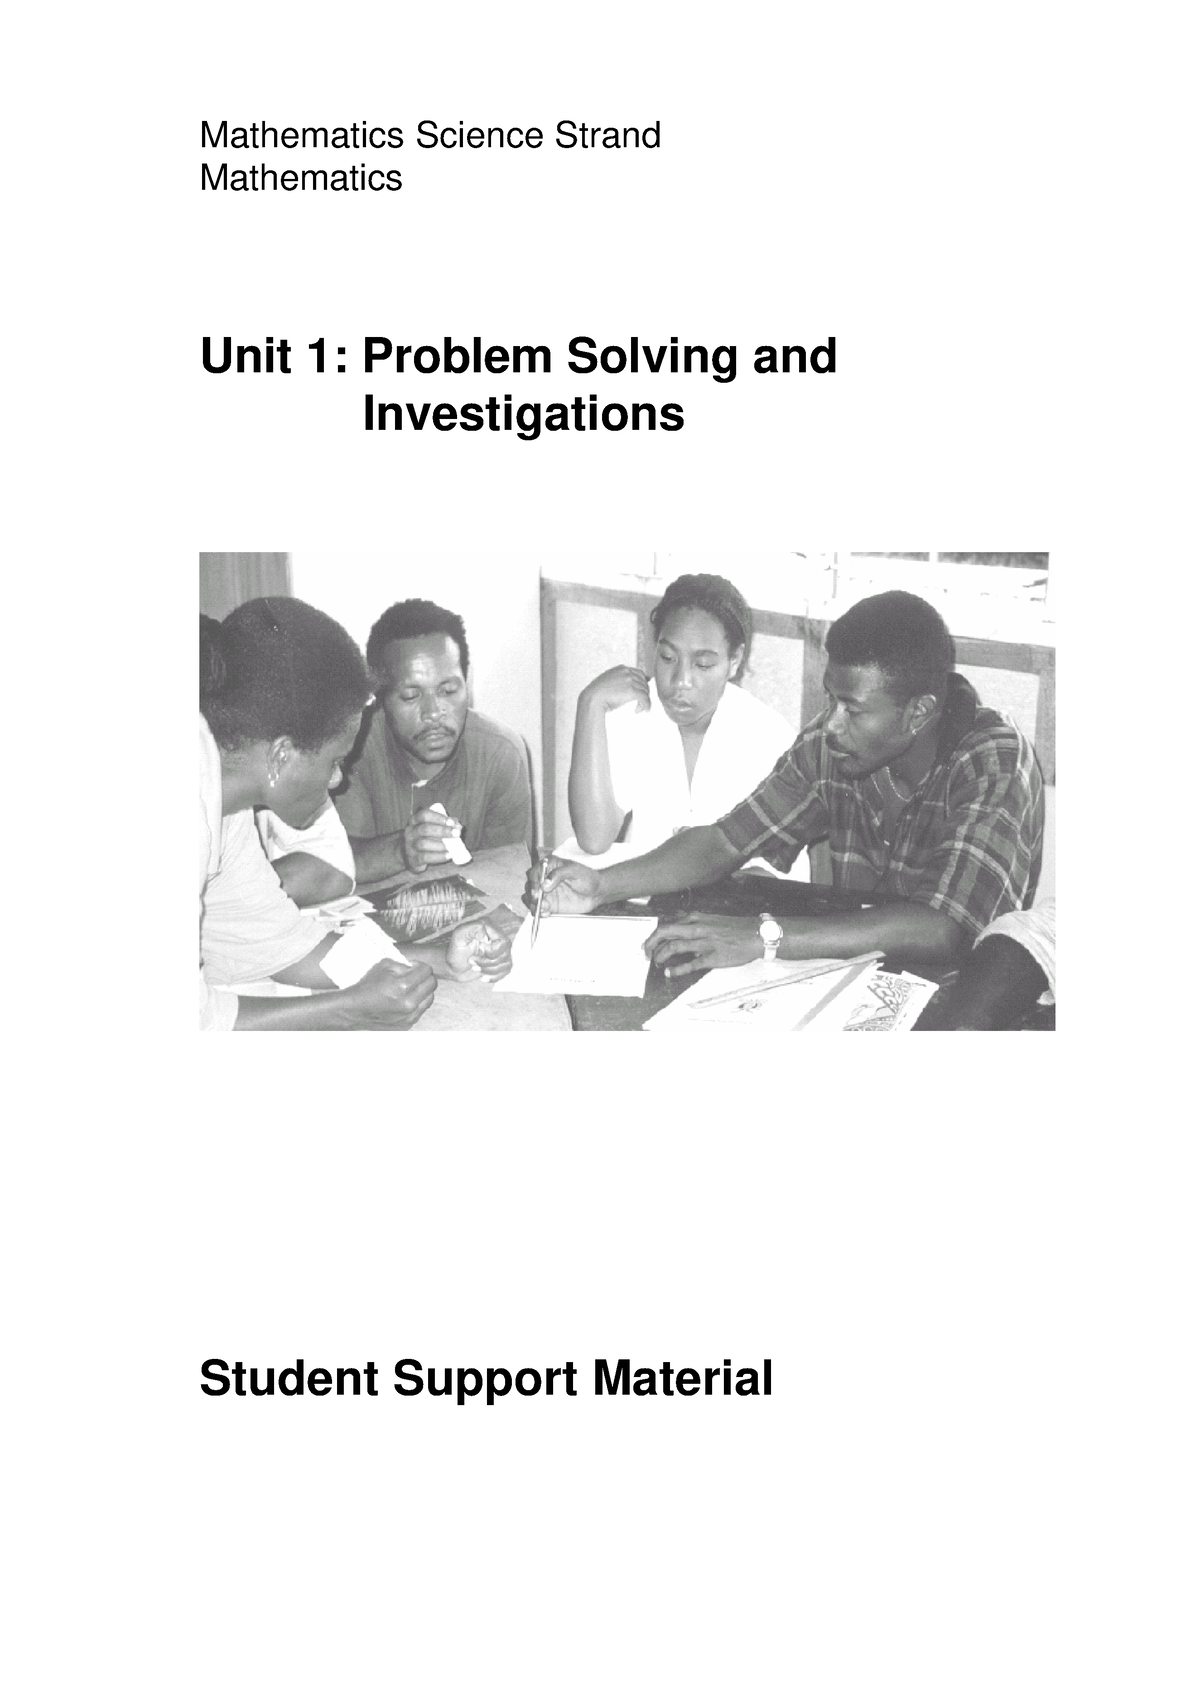 write the important of investigation and problem solving